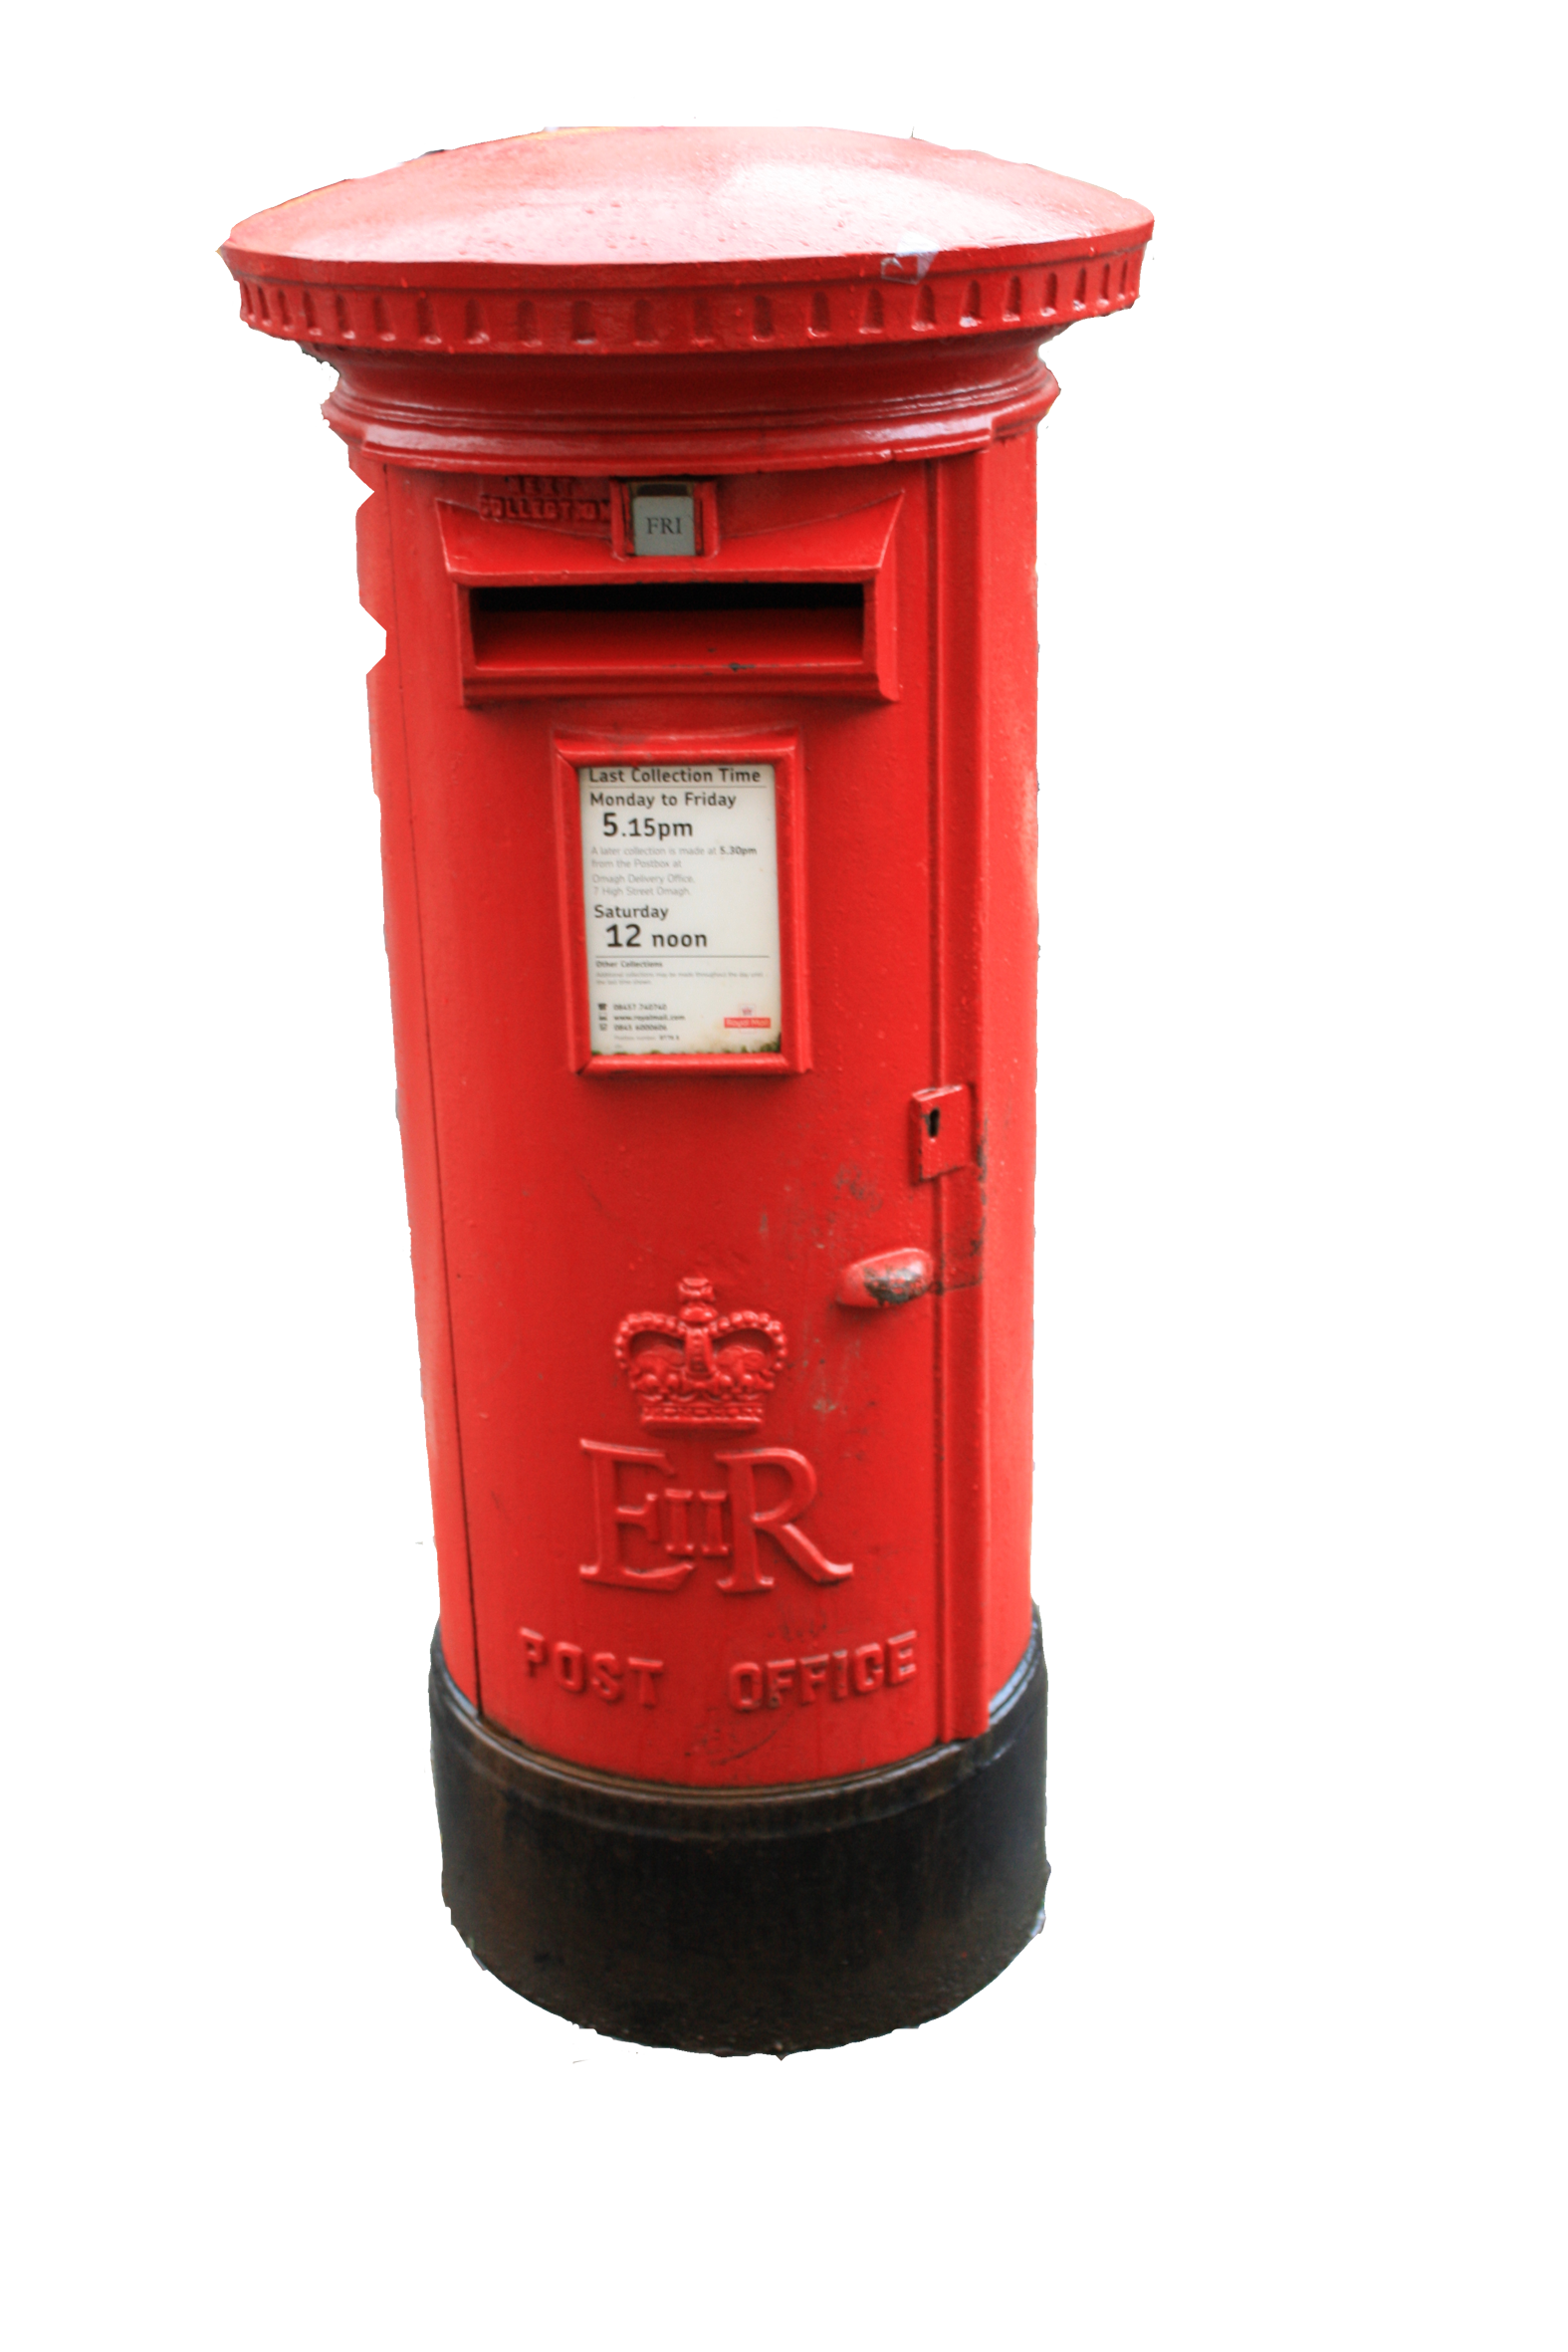 mail clipart red mailbox